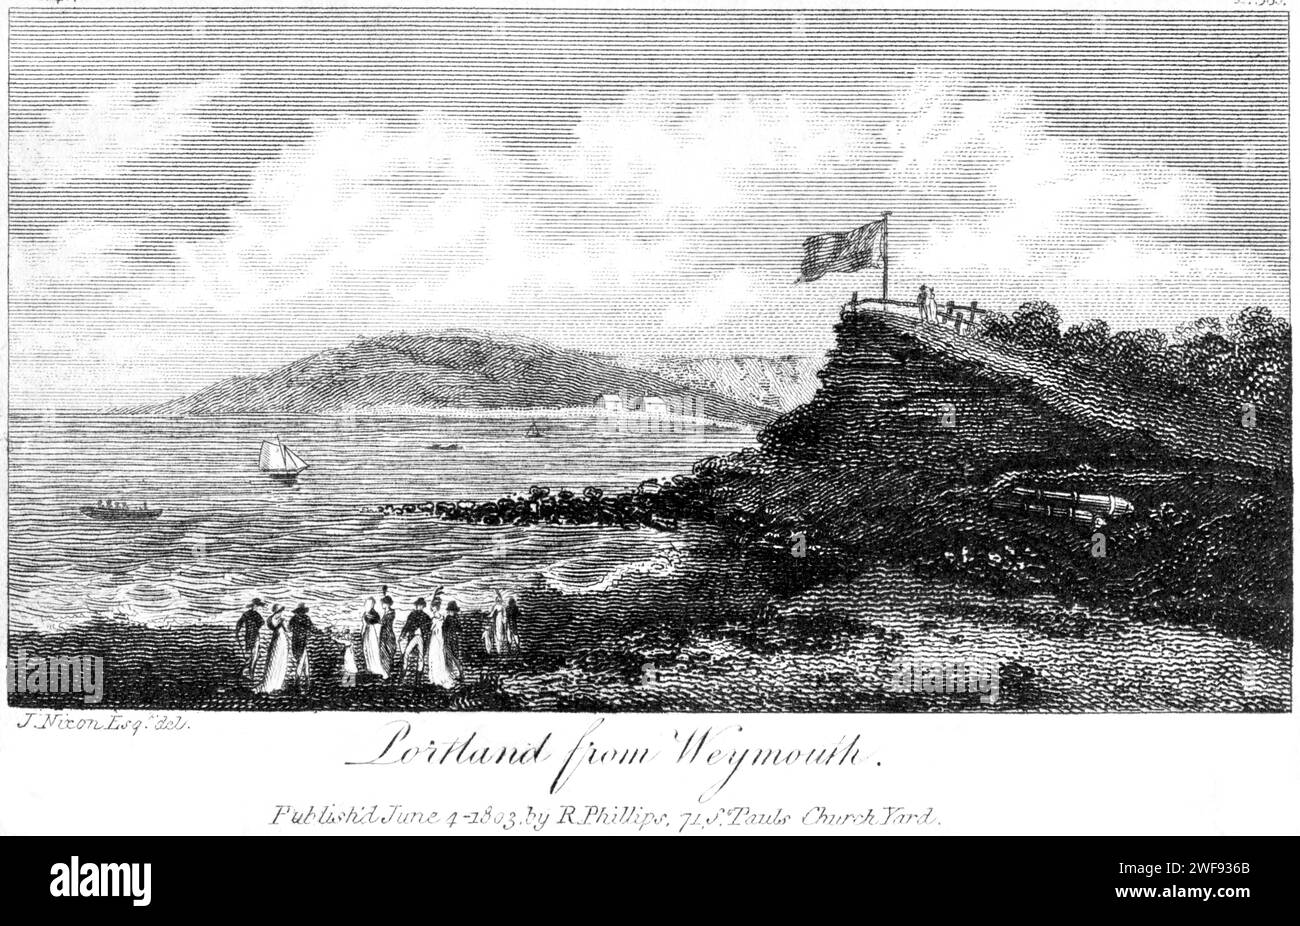 An engraving of Portland from Weymouth, Dorset UK scanned at high resolution from a book printed in 1806.Believed copyright free. Stock Photo